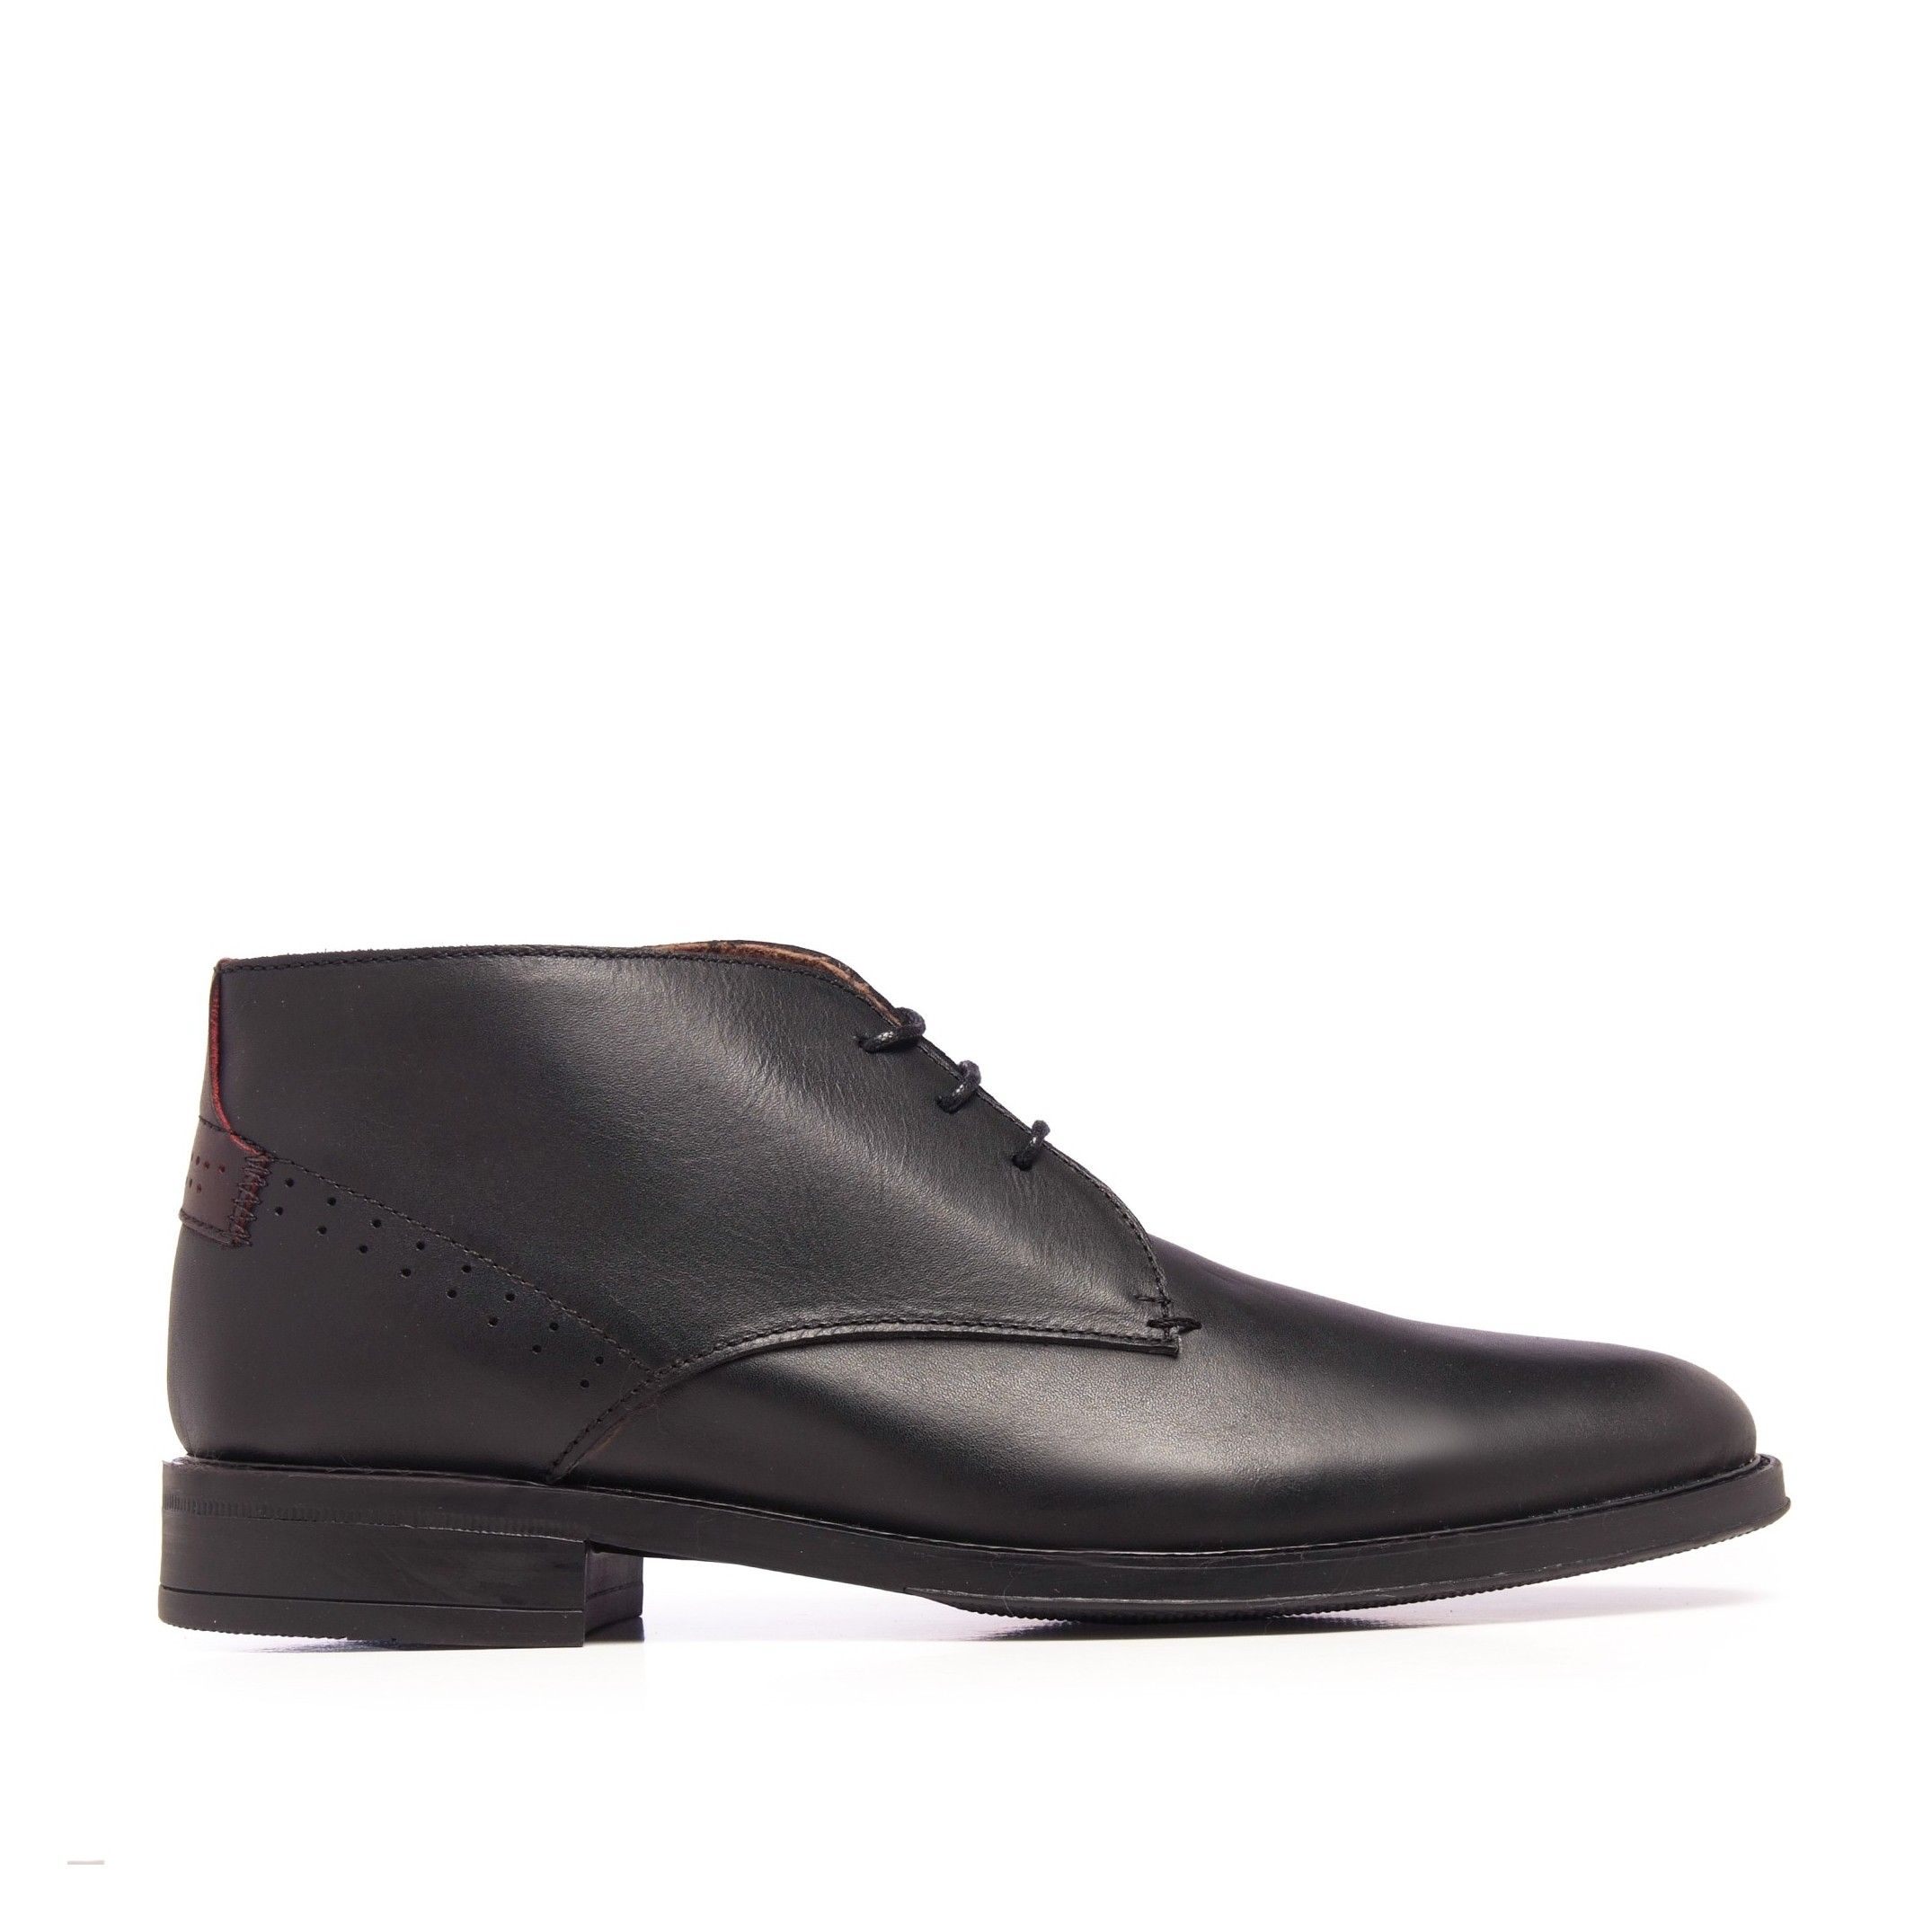 Ankle boots for men with laces closure. Upper and inner made of leather. Rubber sole. Made in Spain.